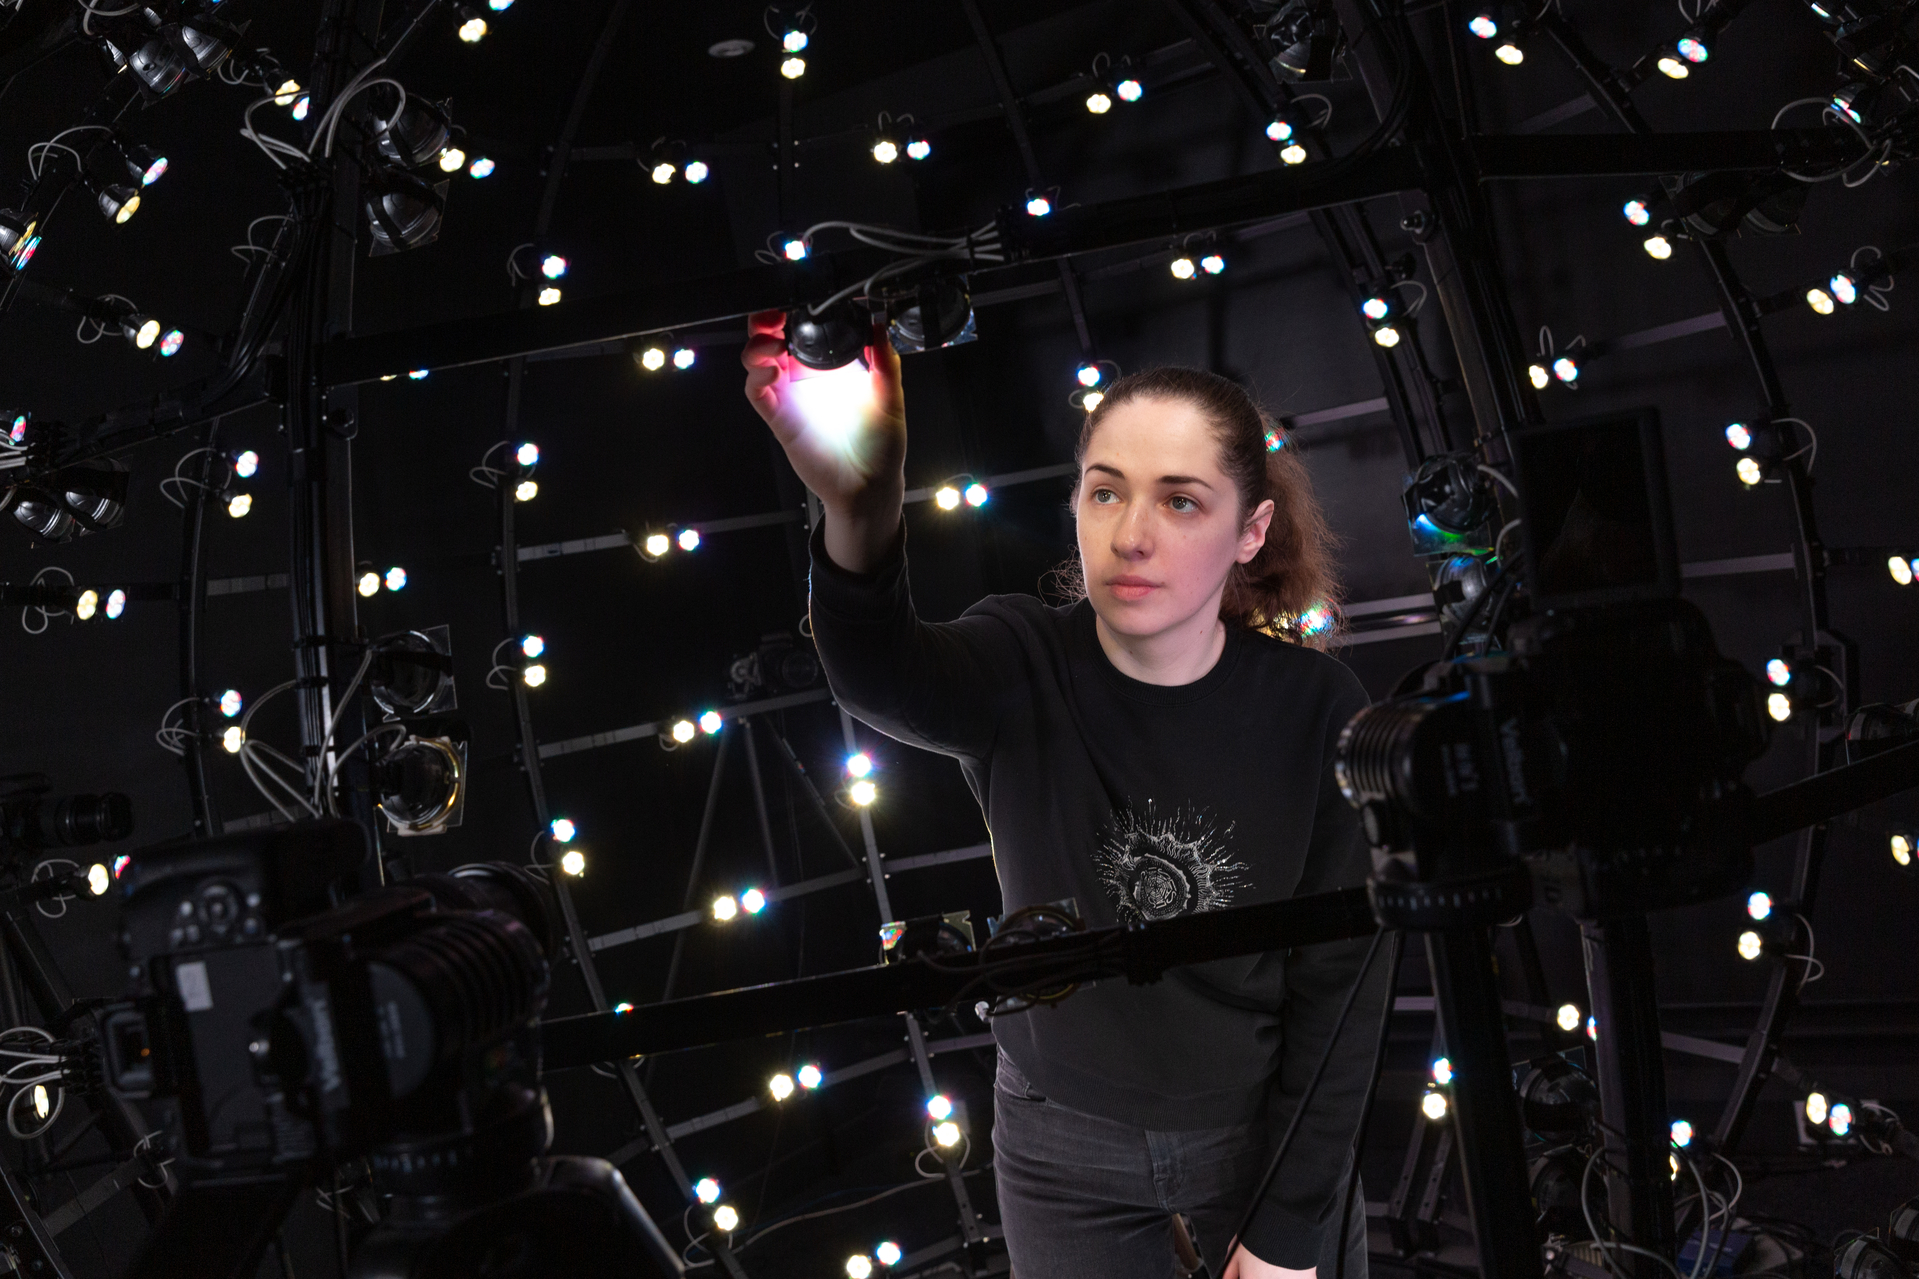 A woman scientist making adjustments to the Imperial College Multispectral Light Stage